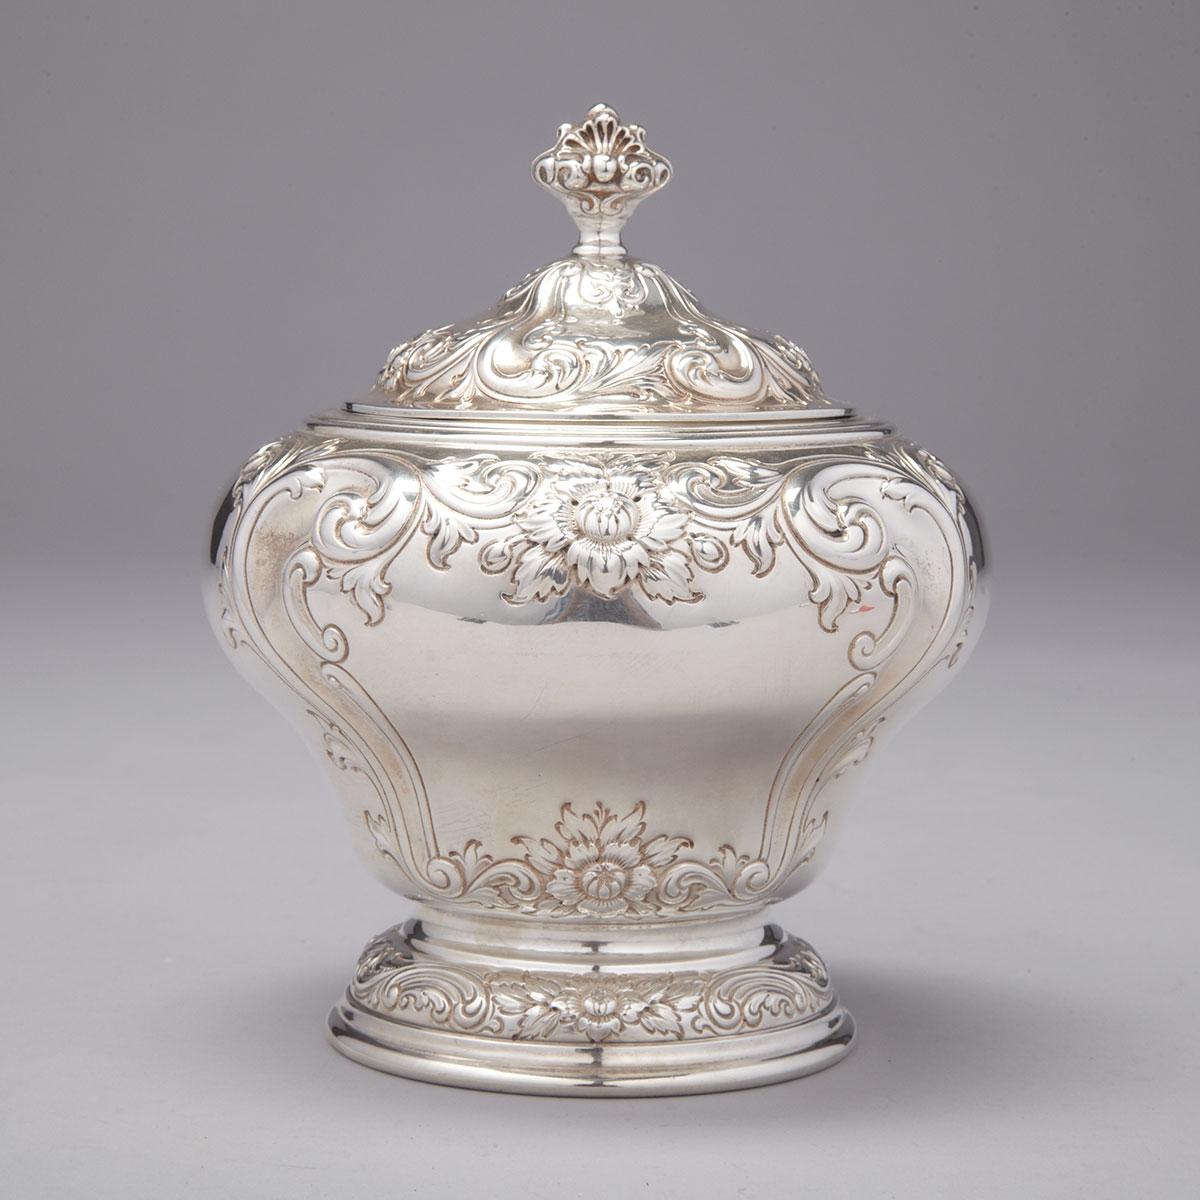 Canadian Silver Covered Sugar Bowl, Henry Birks & Sons, Montreal, Que., early 20th century